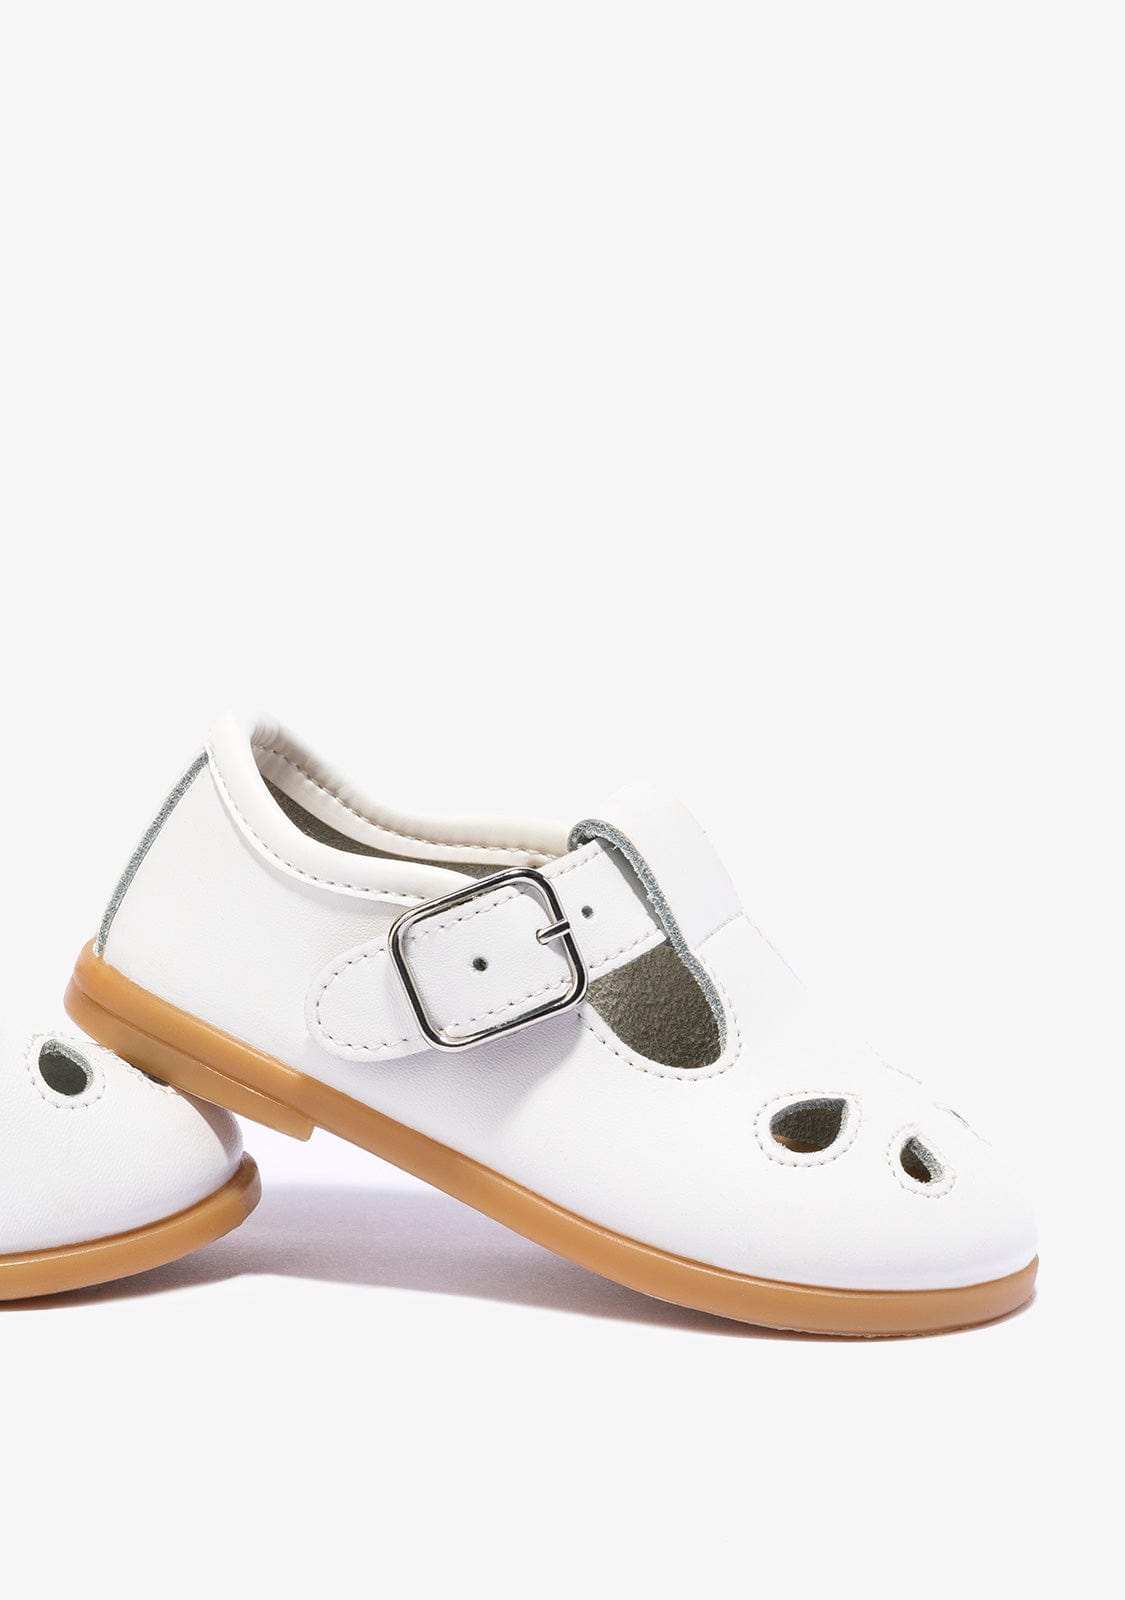 OSITO Shoes Baby's White Buckle Shoes Napa